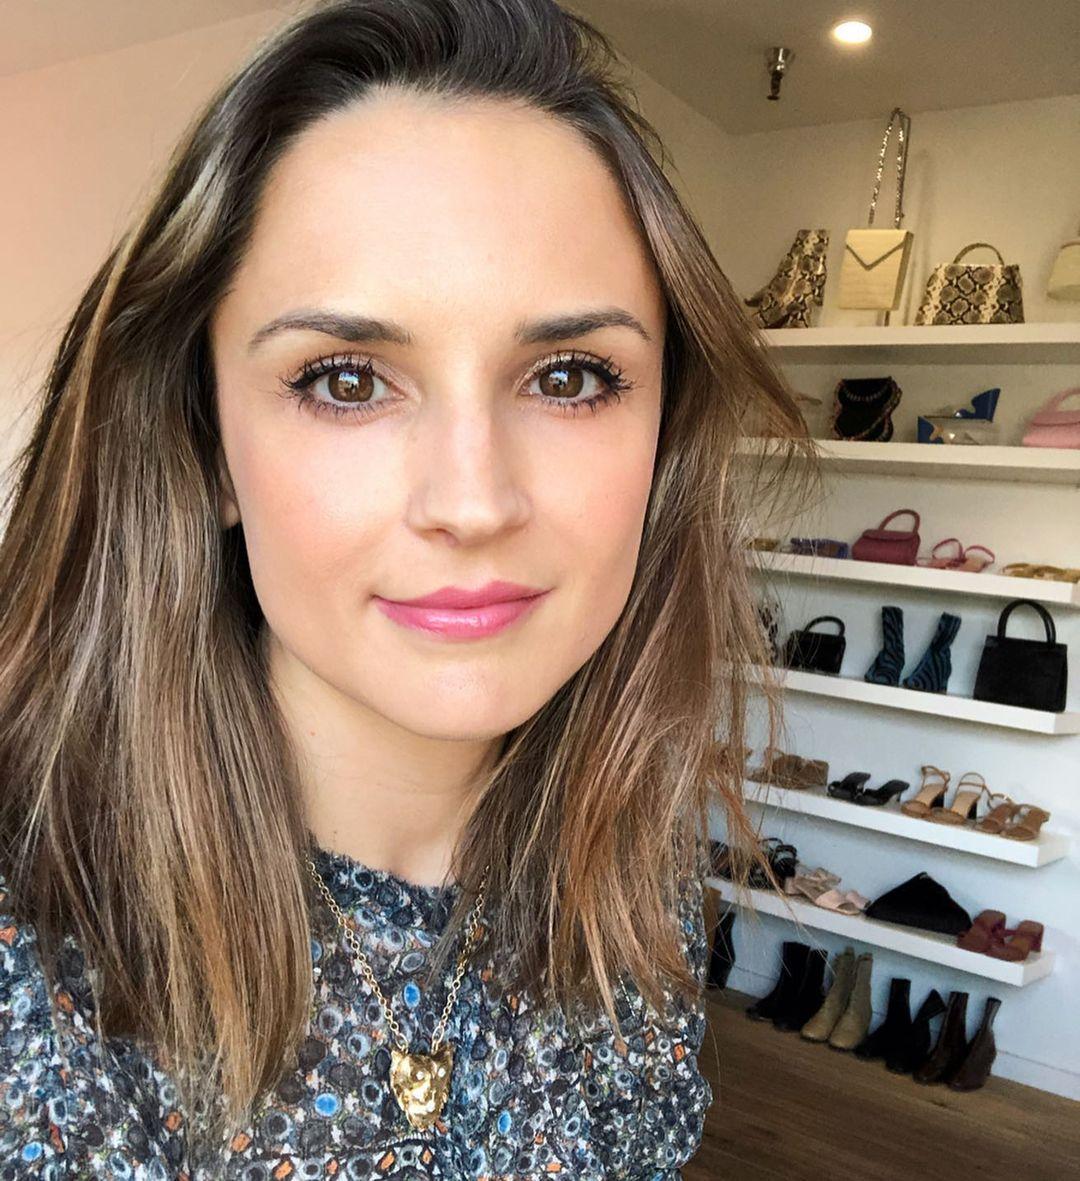 A photo showing Rachael Leigh Cook in her footwear closet